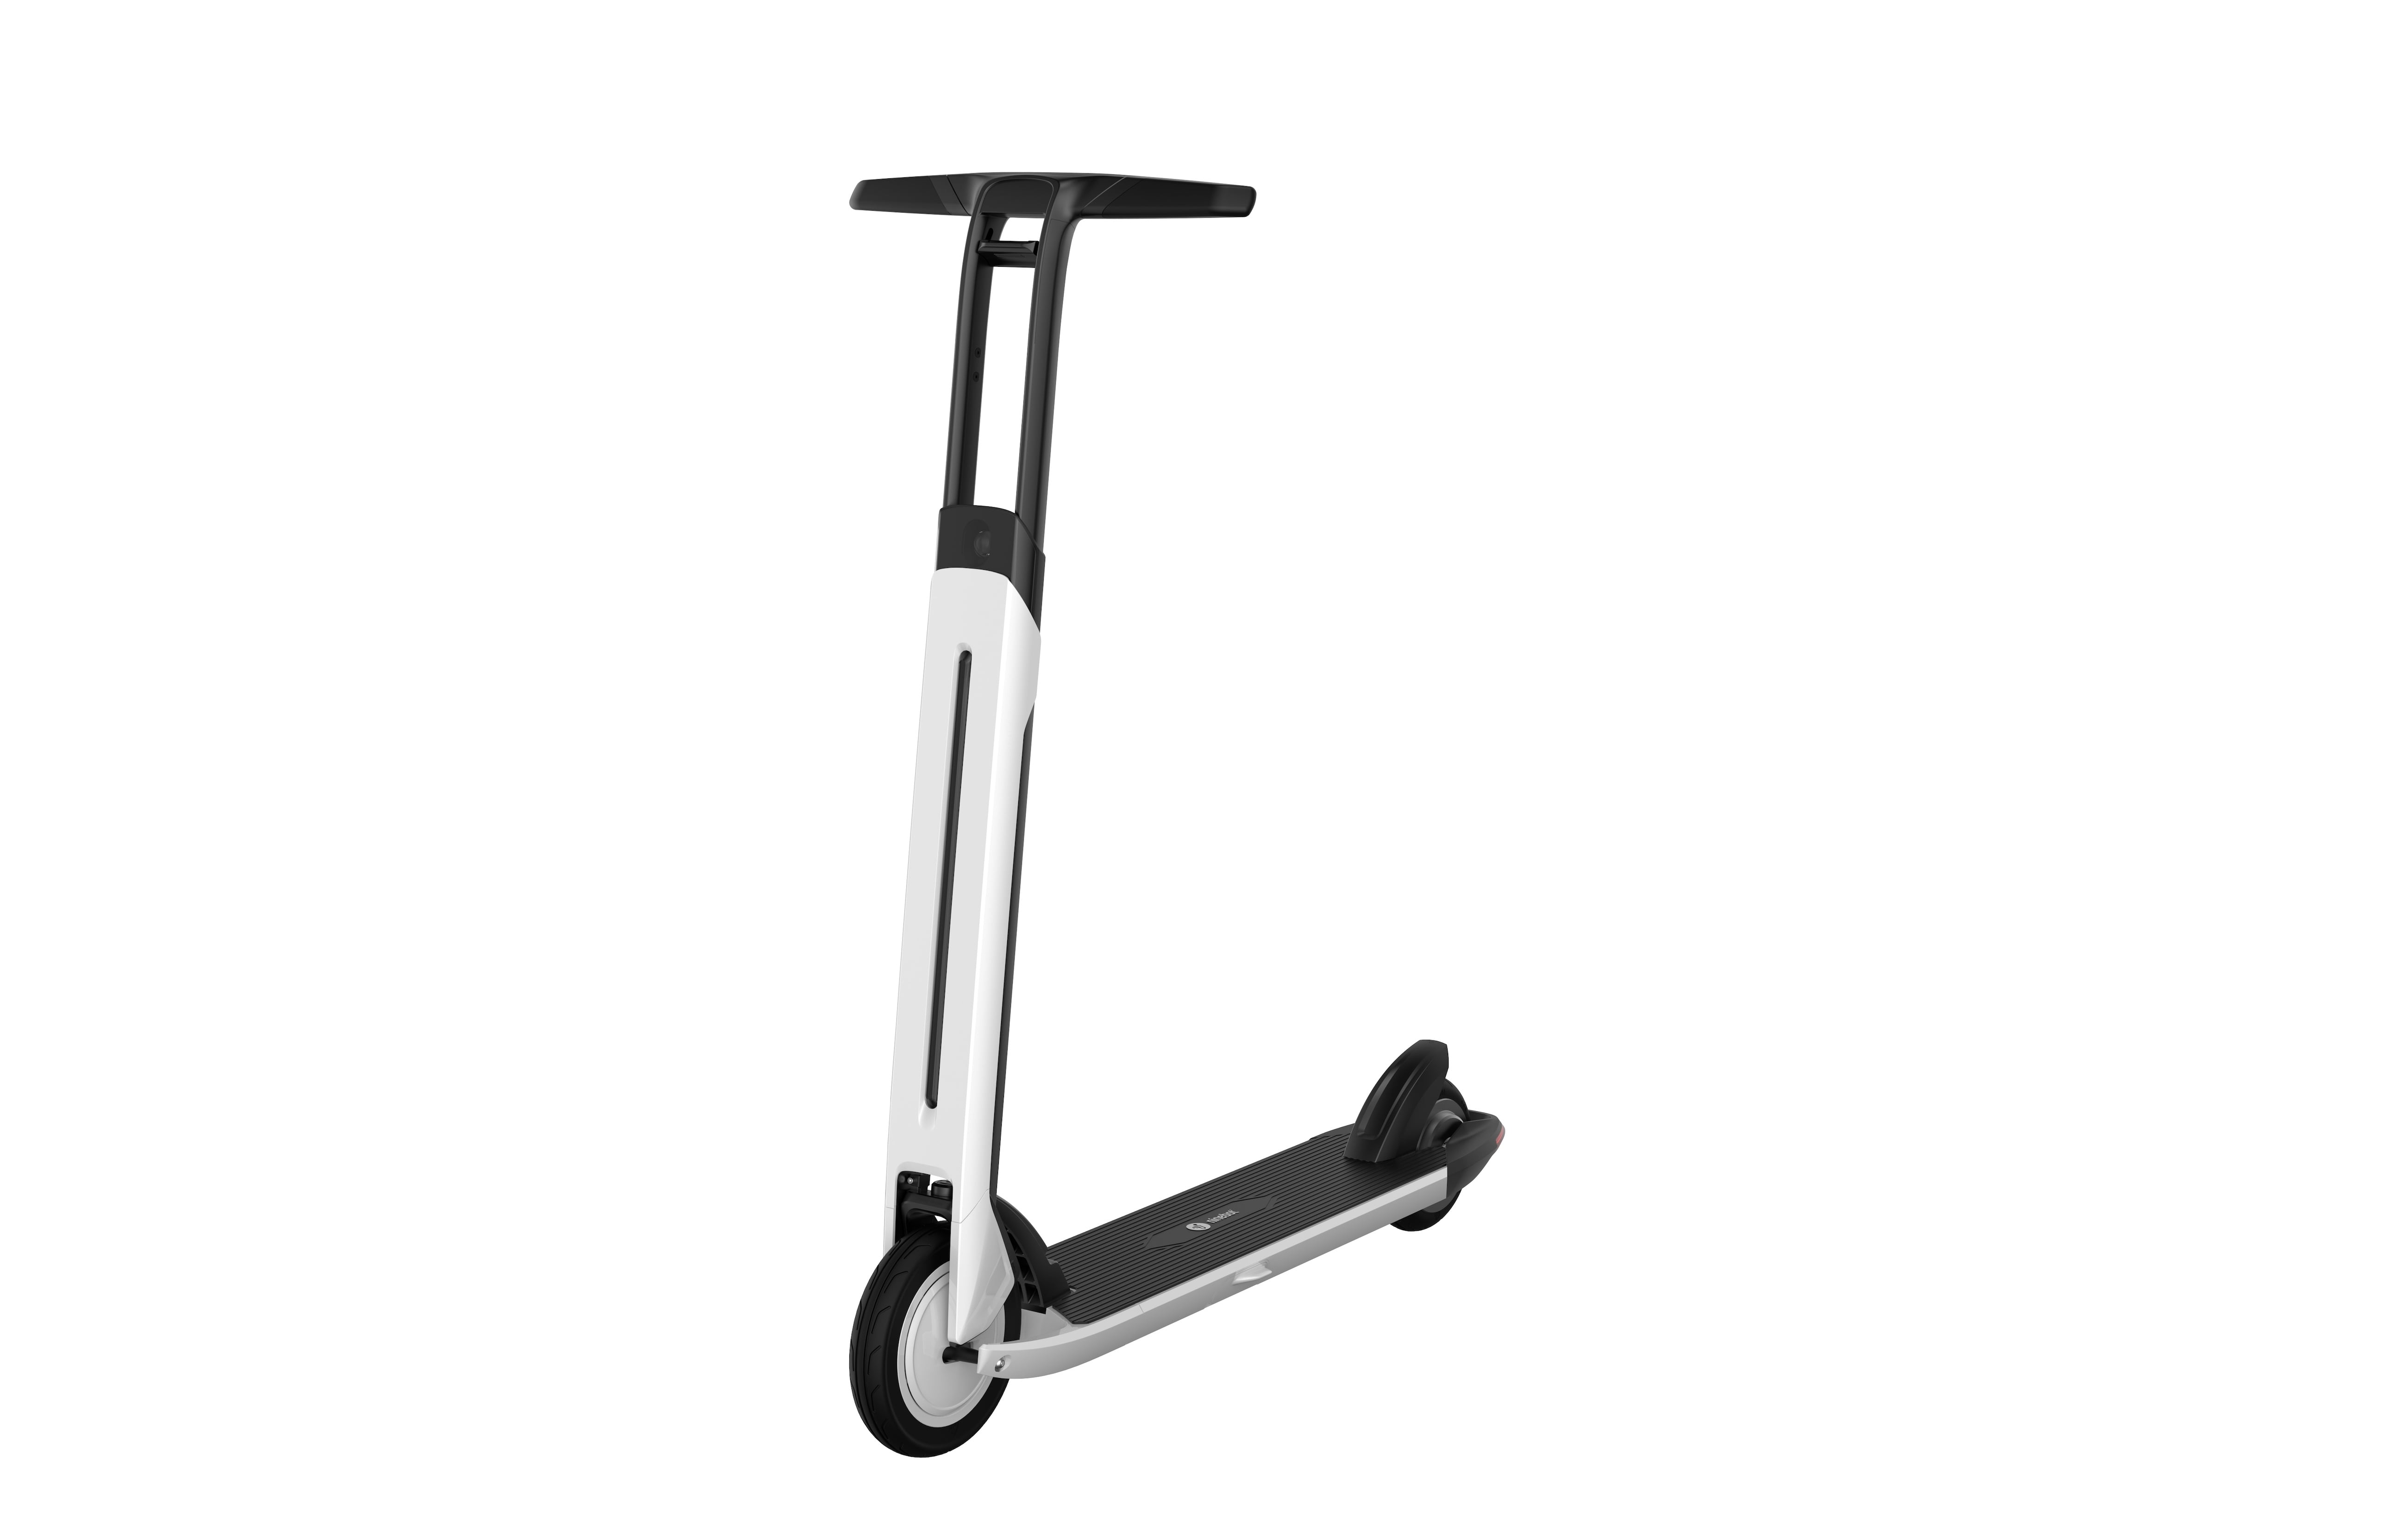 most compact scooter